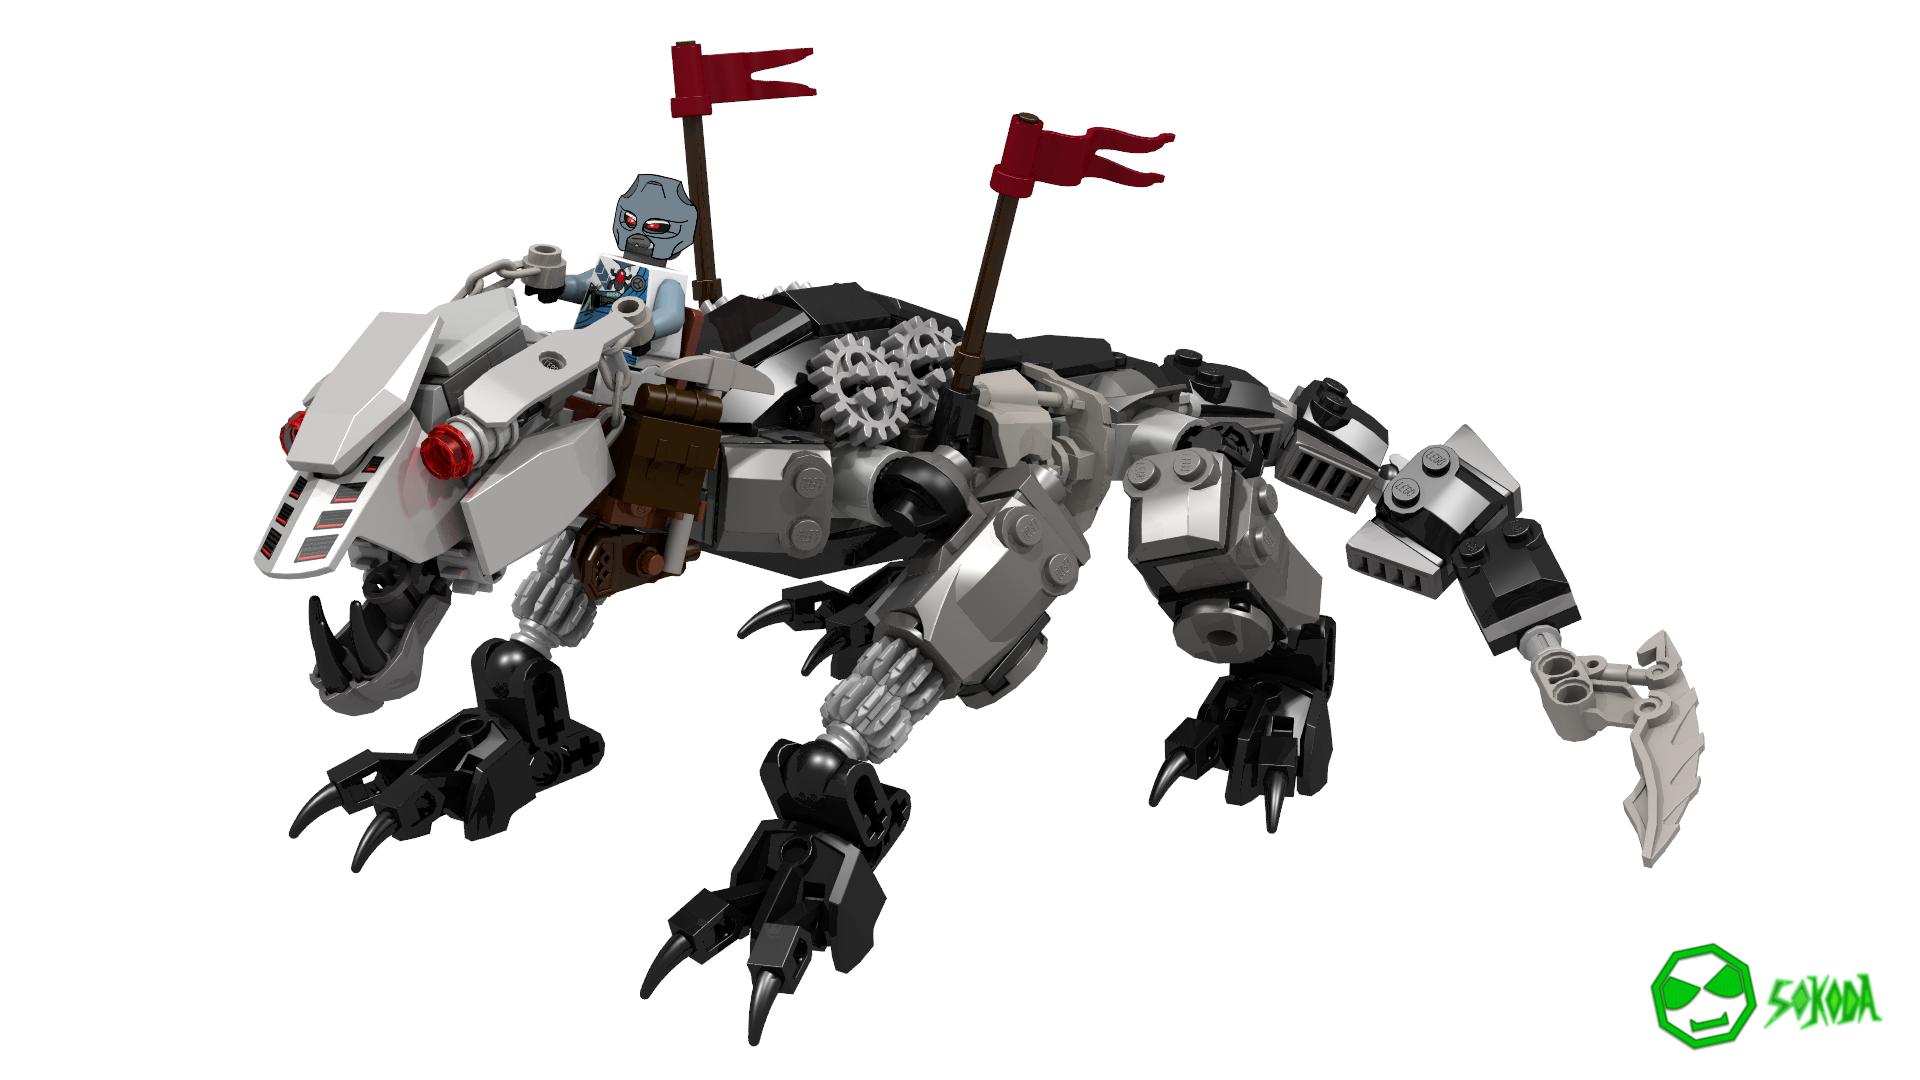 Weapon: argent wolf blade - Lego Creations - The TTV Message Boards